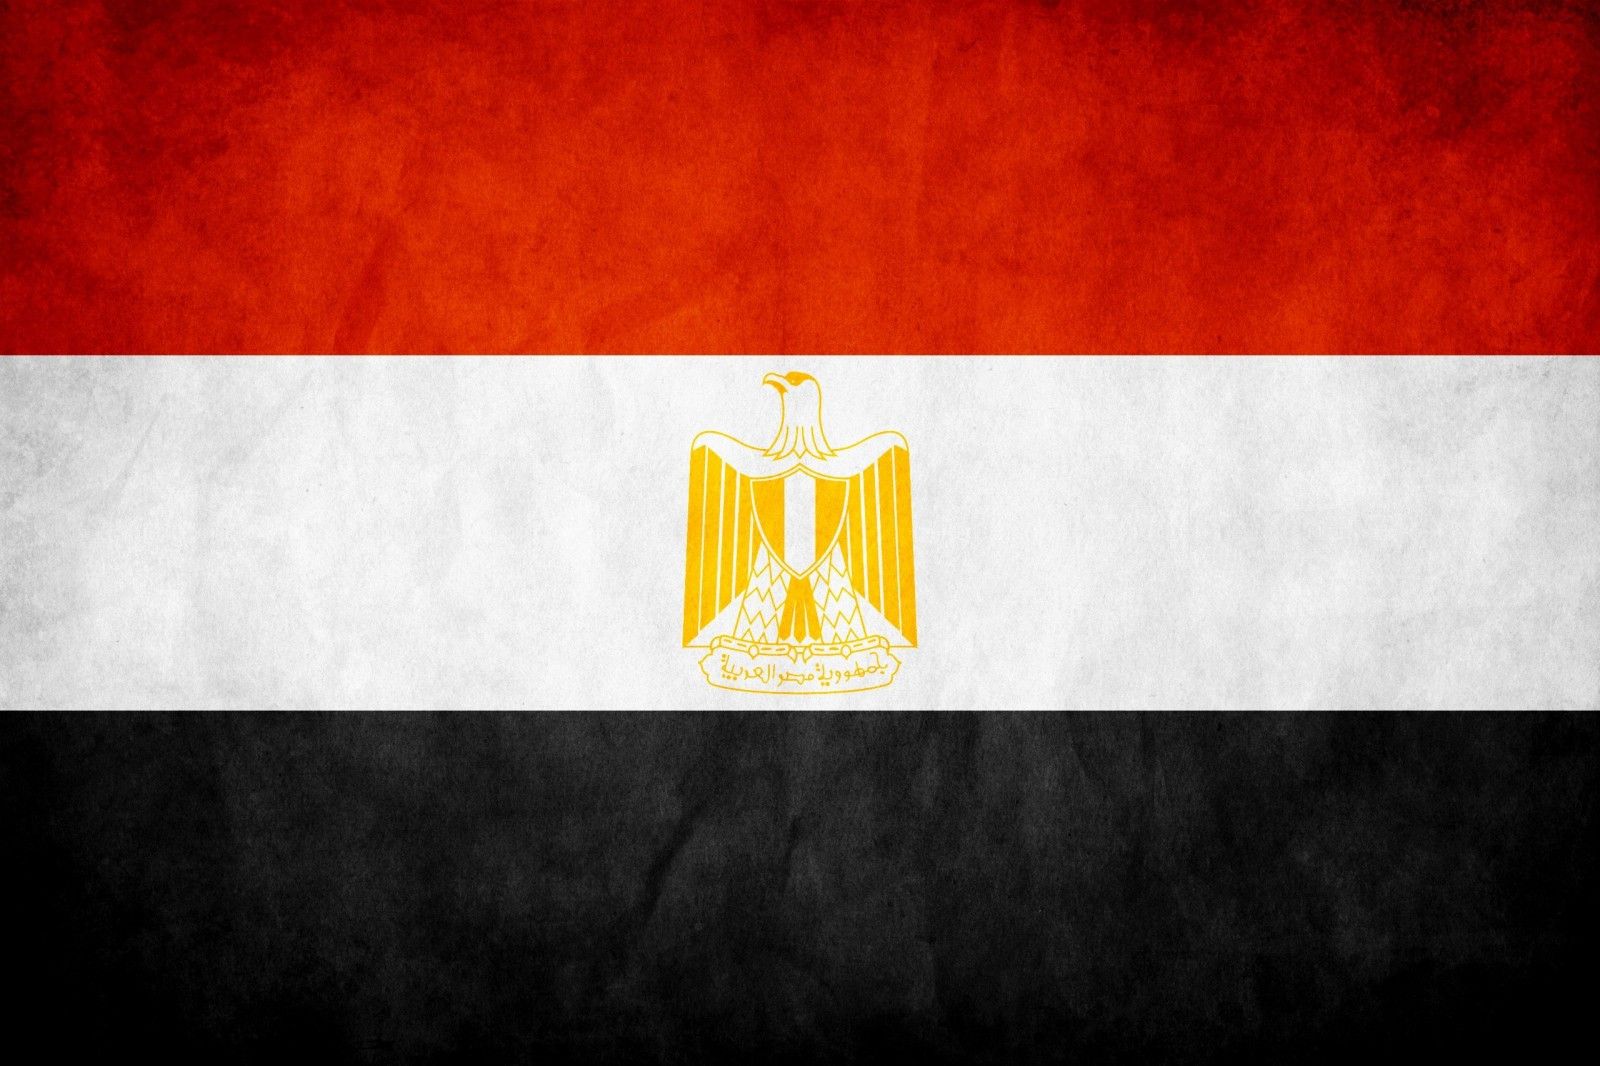 Wallpaper, 2560x1707 px, Africa, ancient, architecture, Egypt, flag 2560x1707